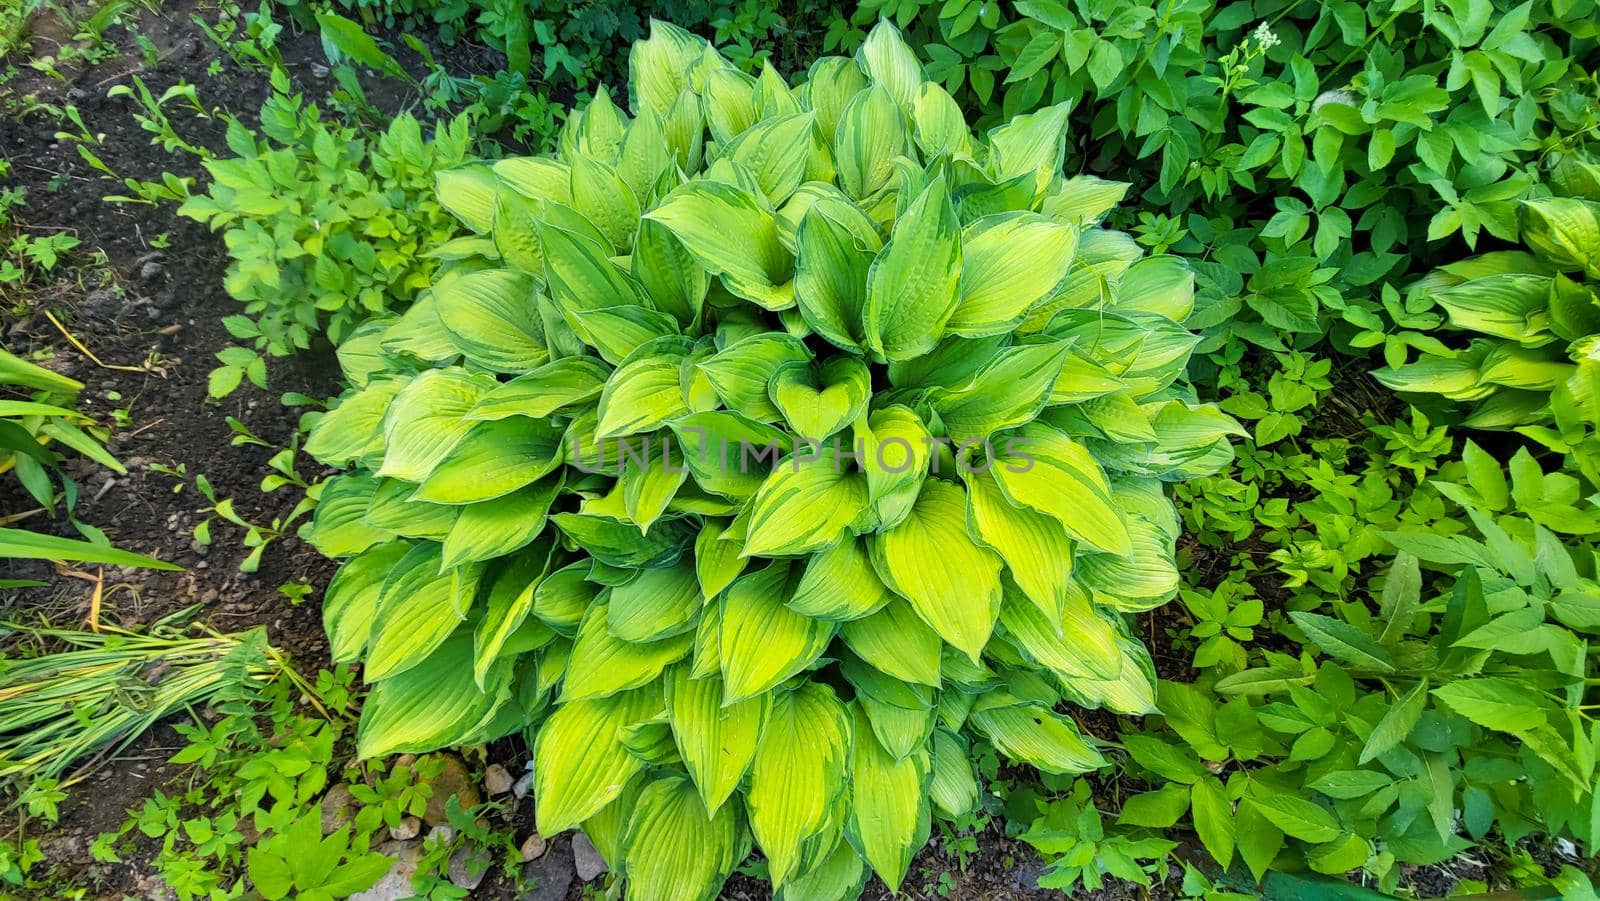 A hosta flower with green leaves grows in a flower bed in the city garden by lapushka62